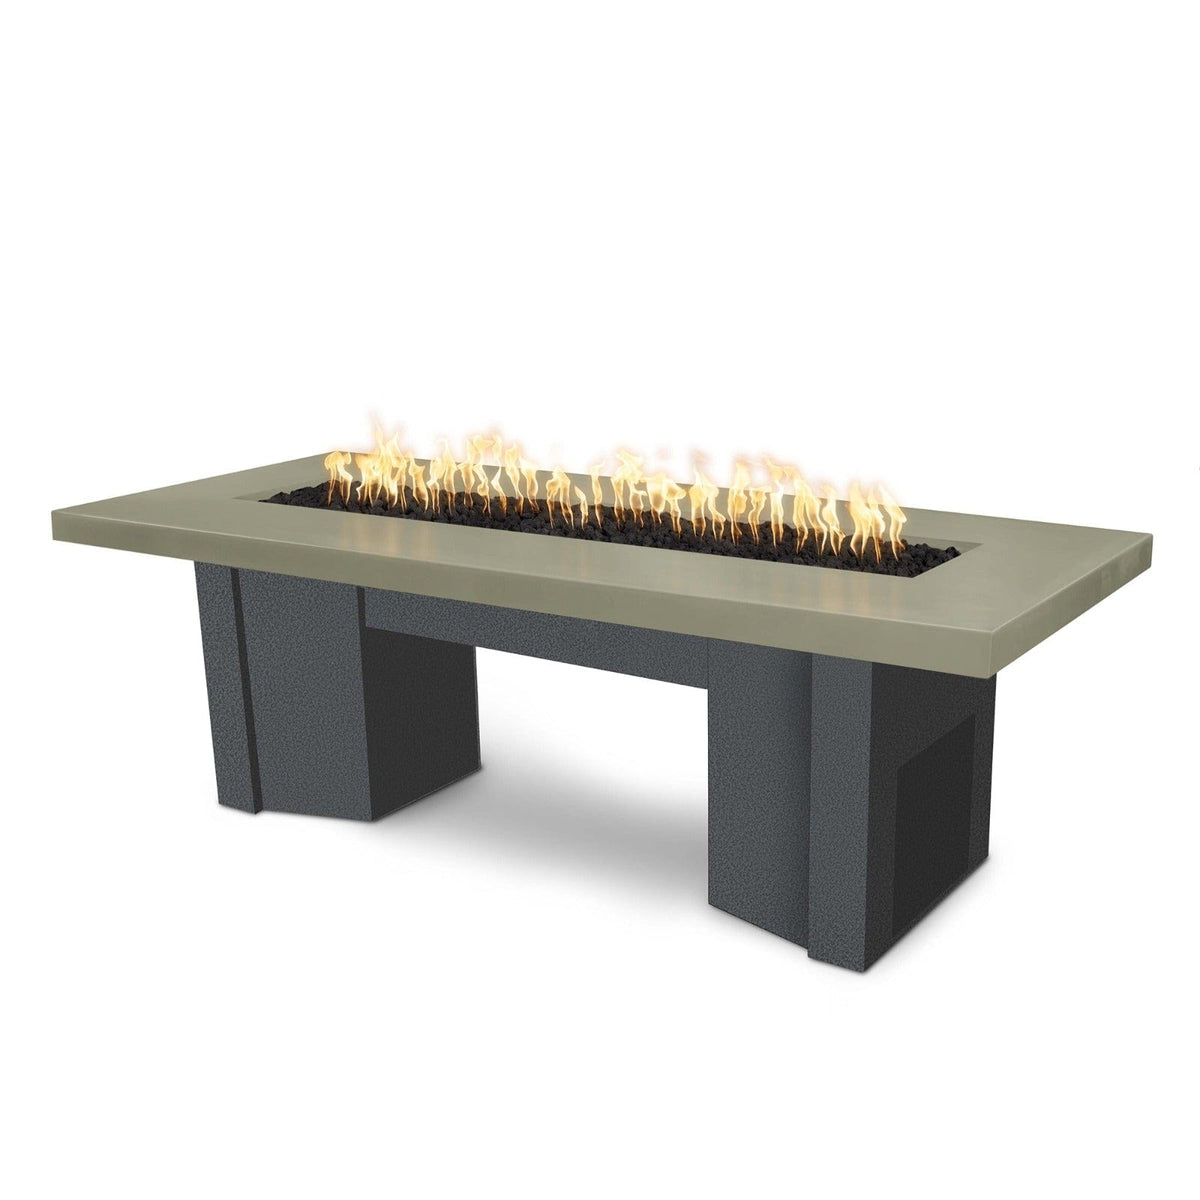 The Outdoor Plus Fire Features Ash (-ASH) / Silver Vein Powder Coated Steel (-SLV) The Outdoor Plus 60&quot; Alameda Fire Table Smooth Concrete in Natural Gas - Match Lit with Flame Sense System / OPT-ALMGFRC60FSML-NG